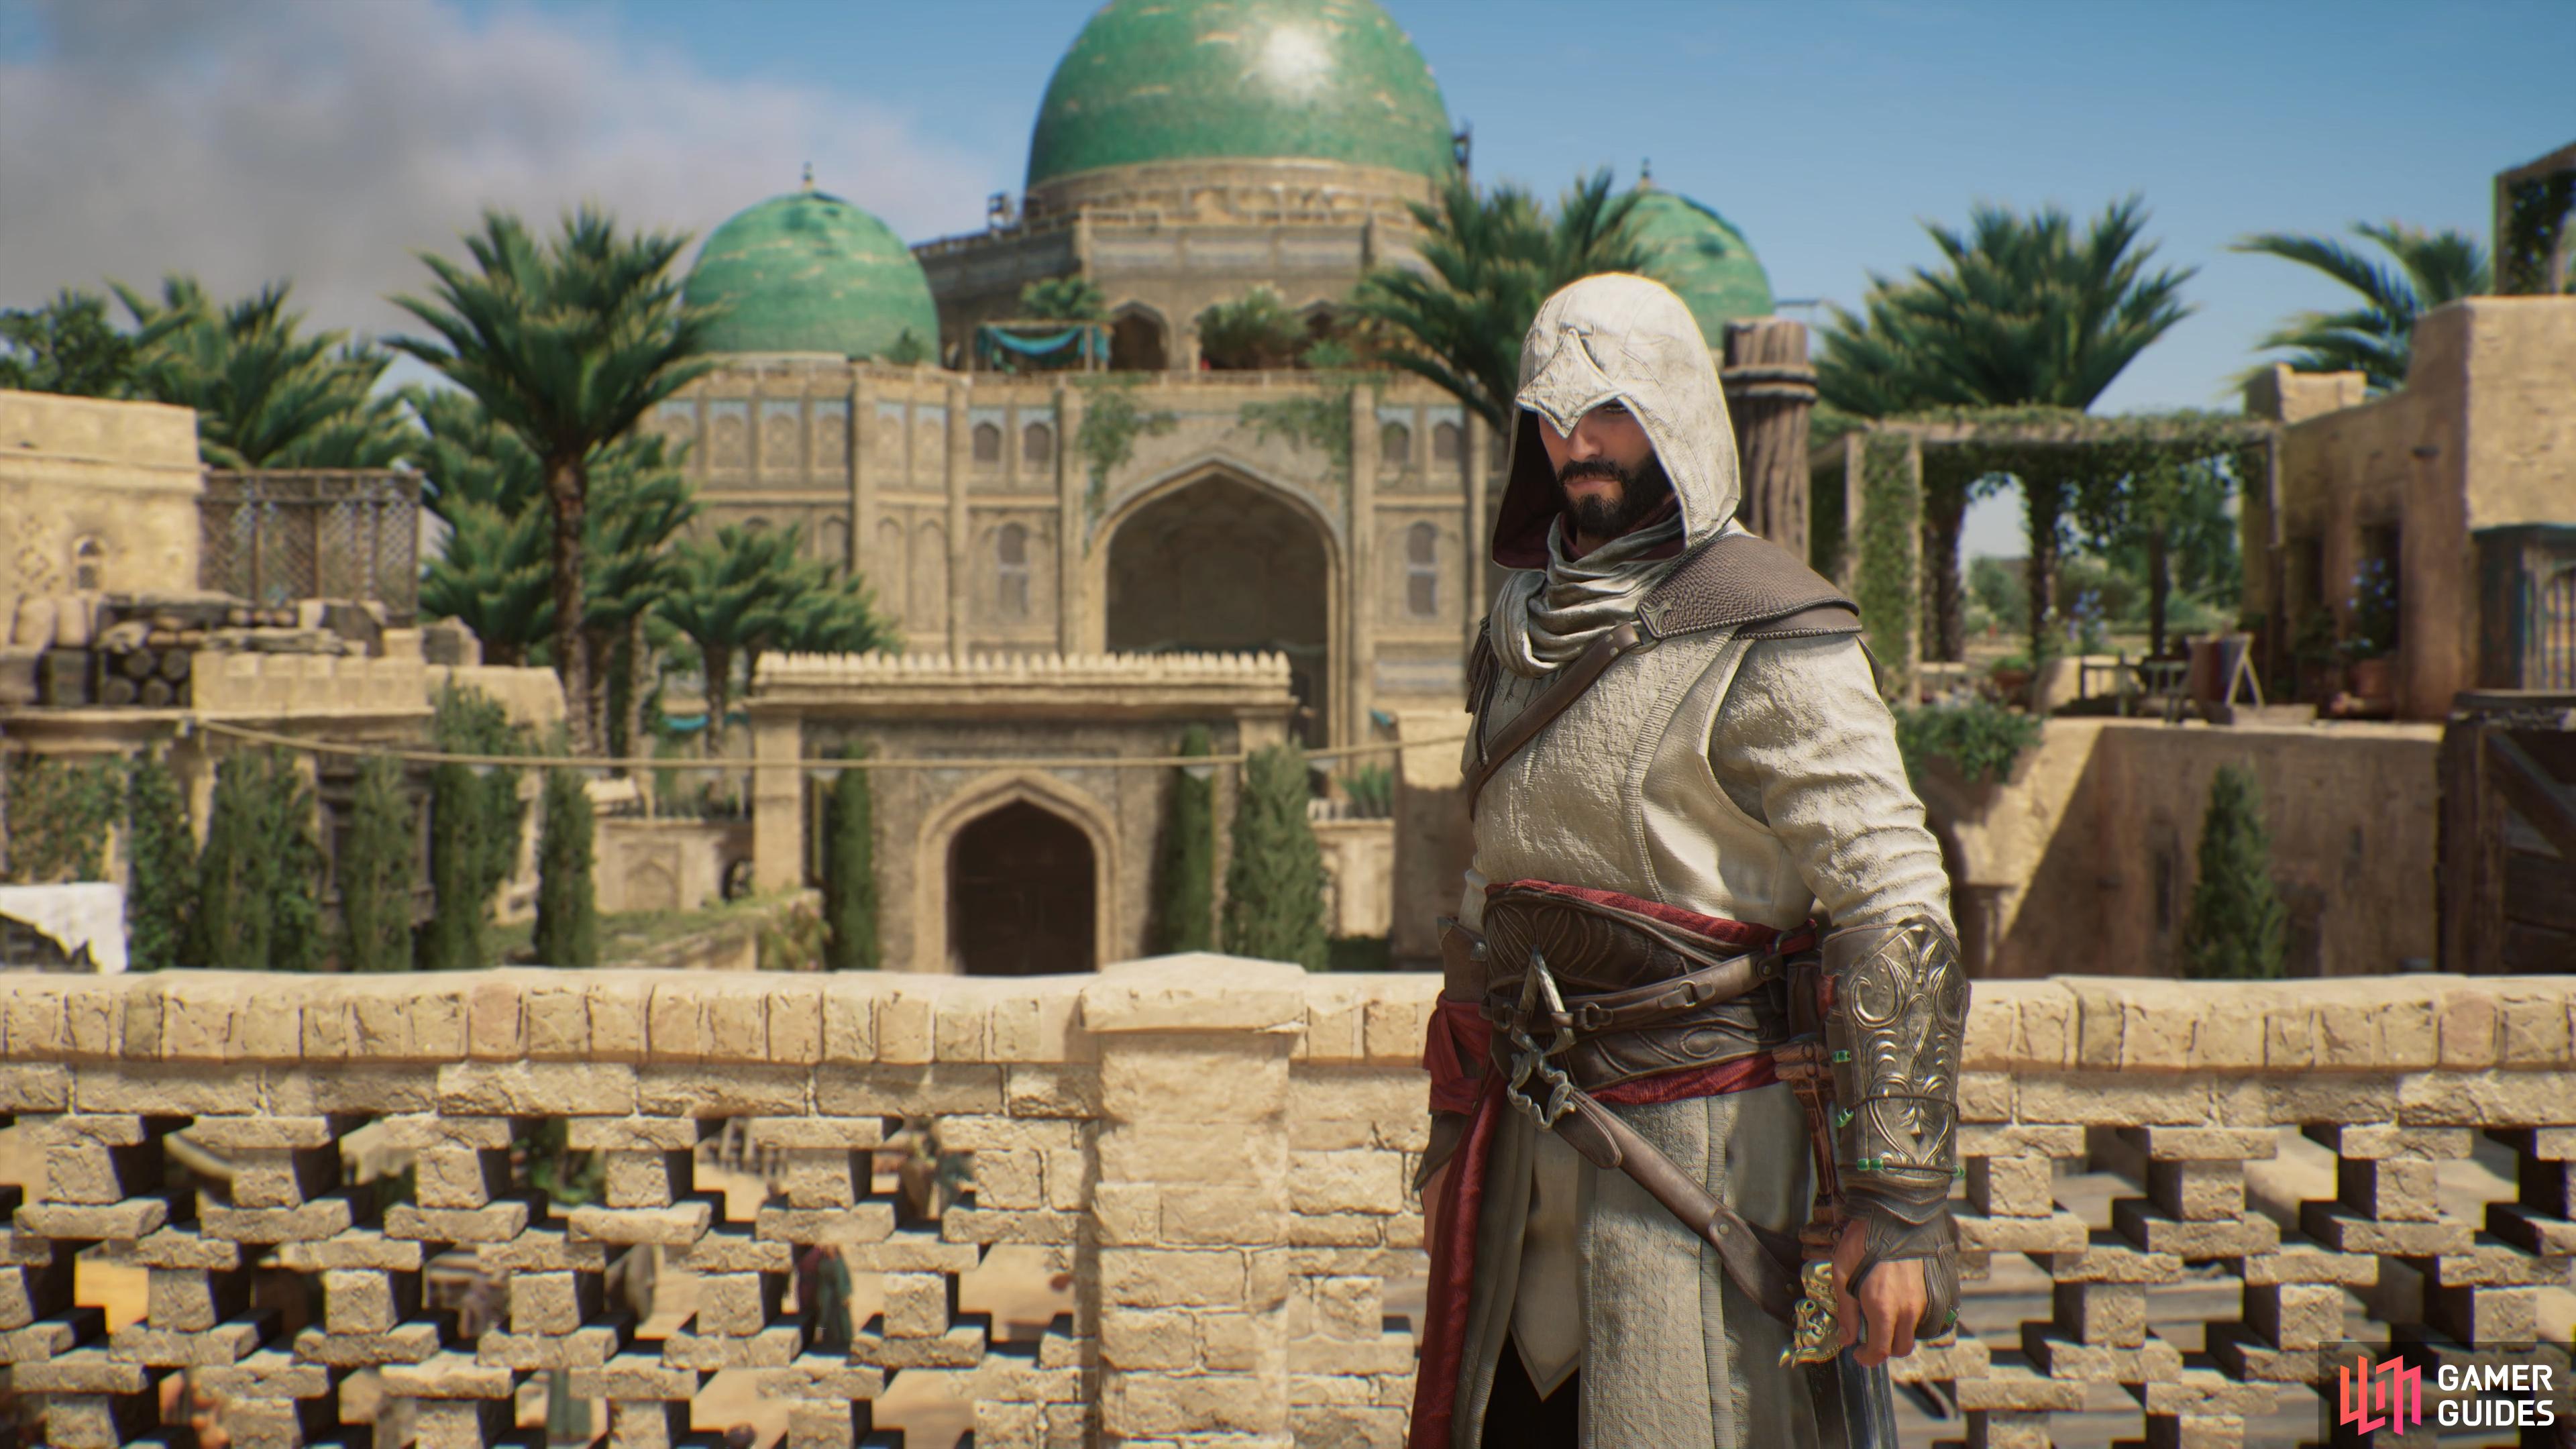 Basim outside the Palace of the Green Dome in Assassin’s Creed Mirage.